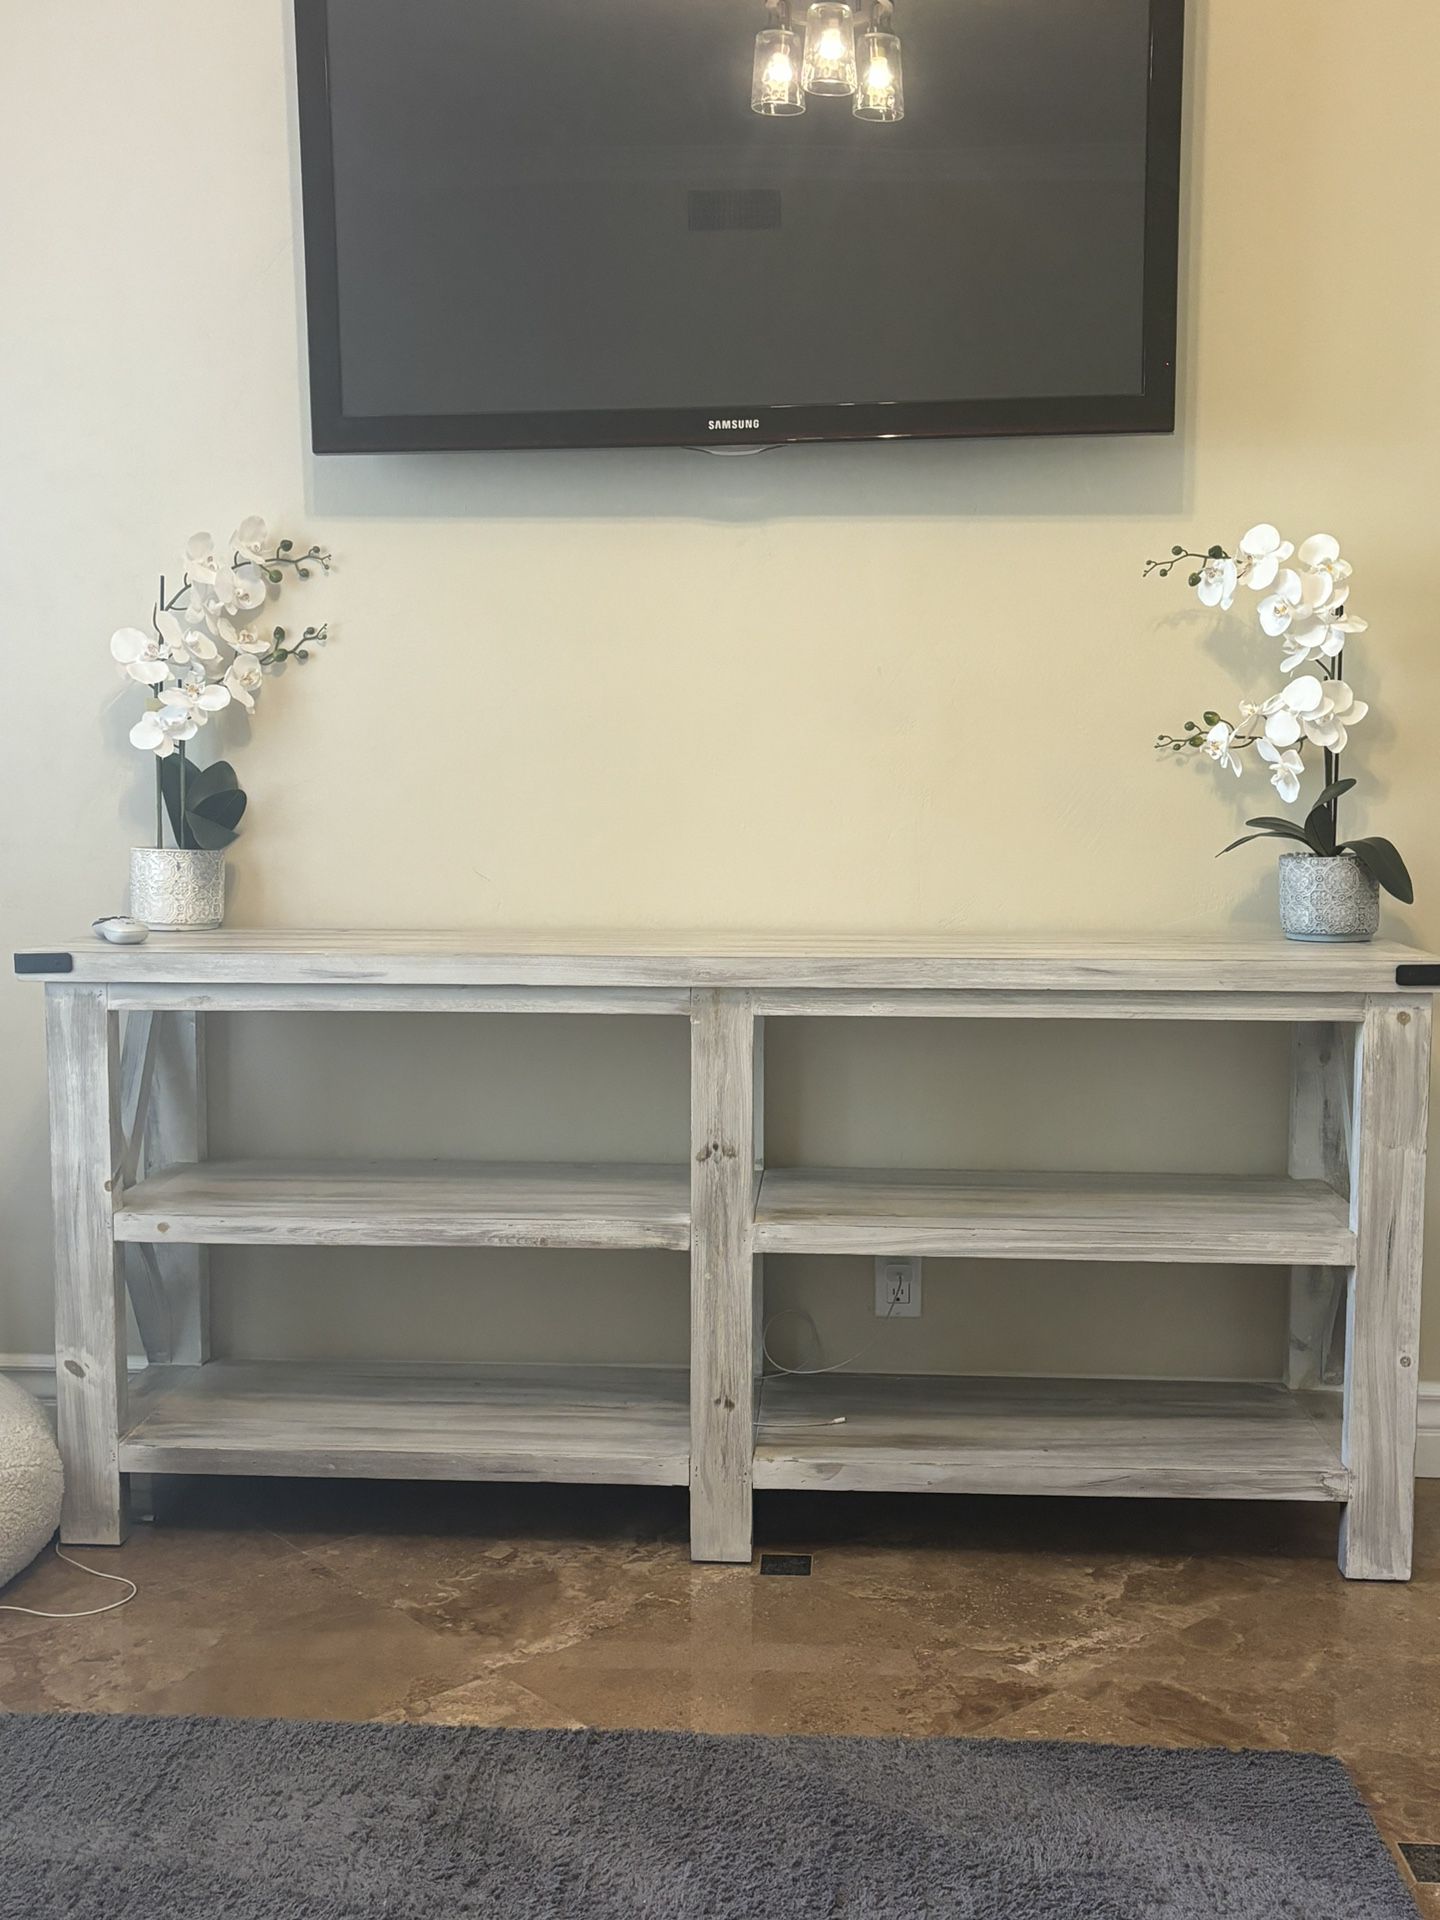 LARGE CONSOLE TABLE w/ SHELVES FOR STORAGE OR INSERT BASKETS